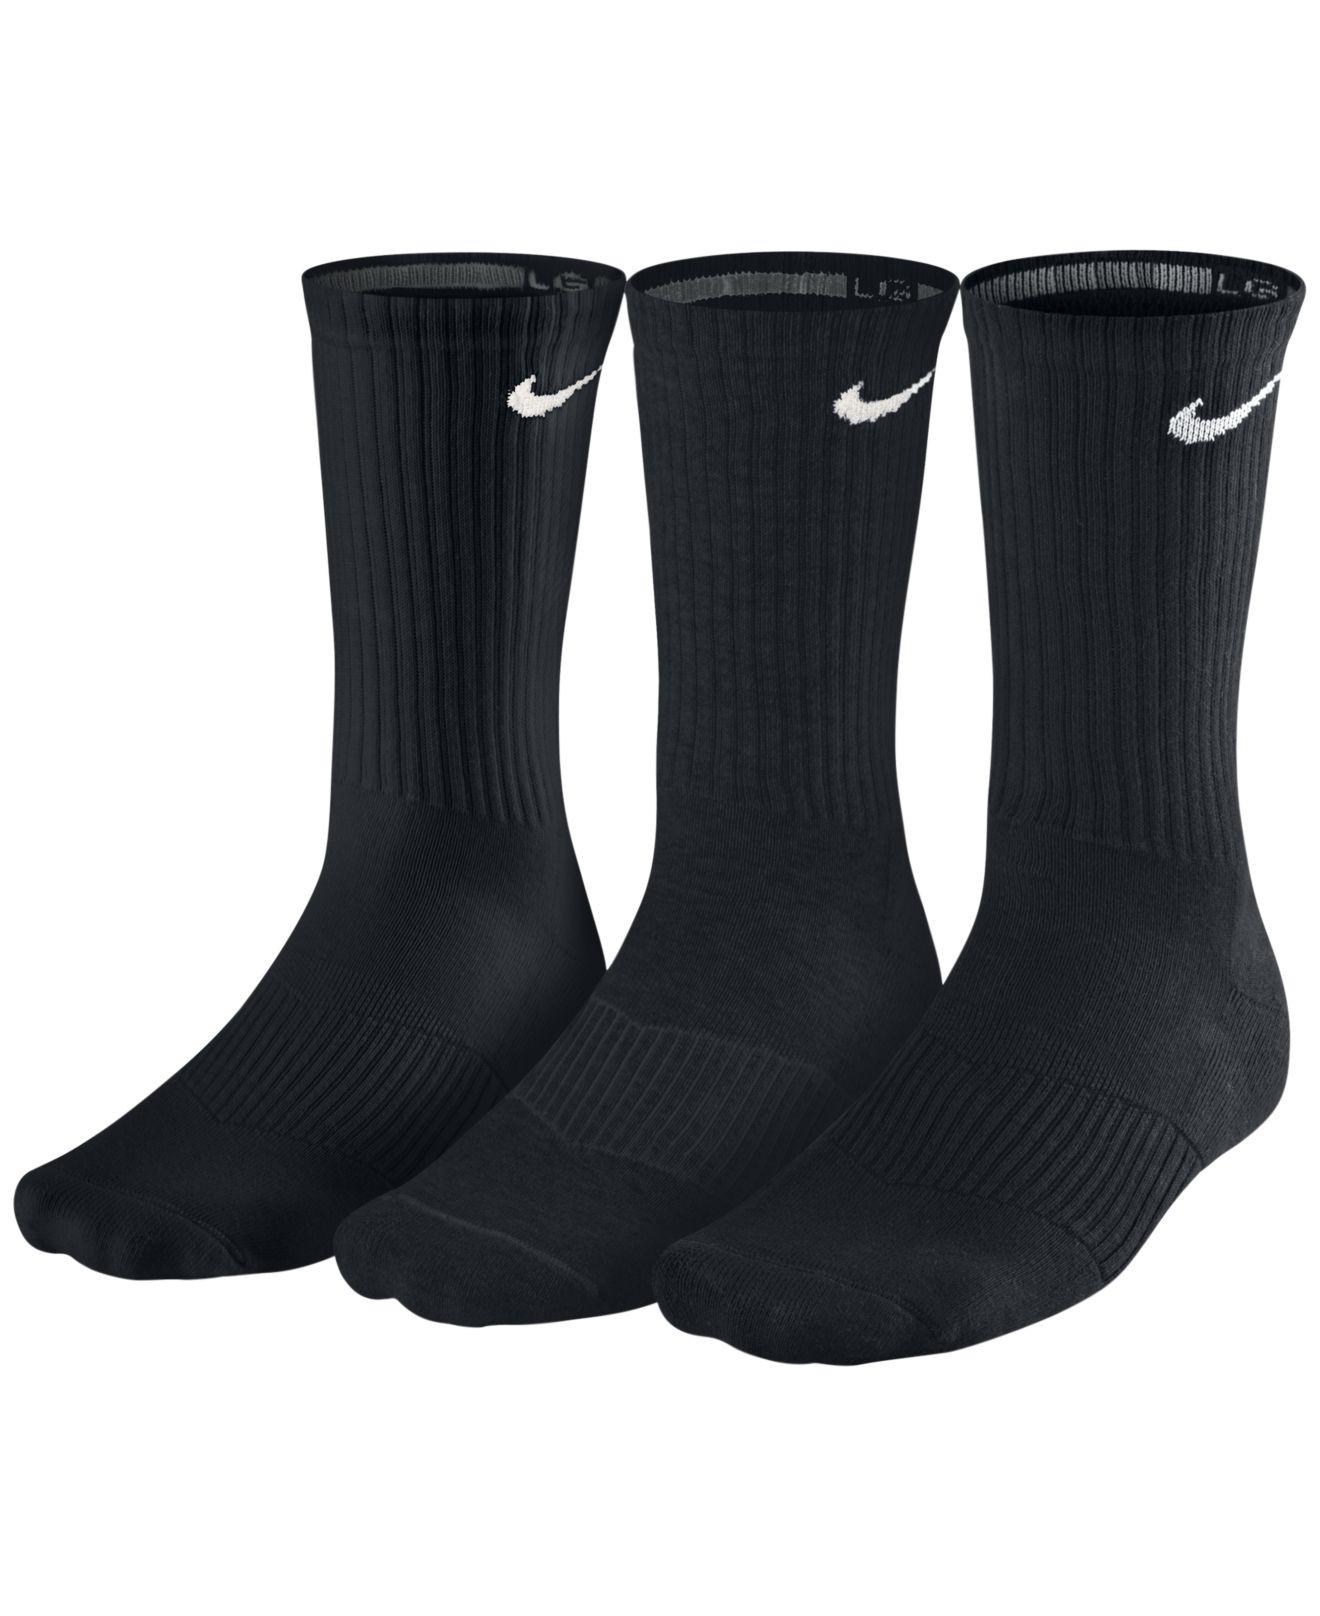 Lyst - Nike Men's Socks, Cotton Cushion Crew Extended Size 3 Pack in ...